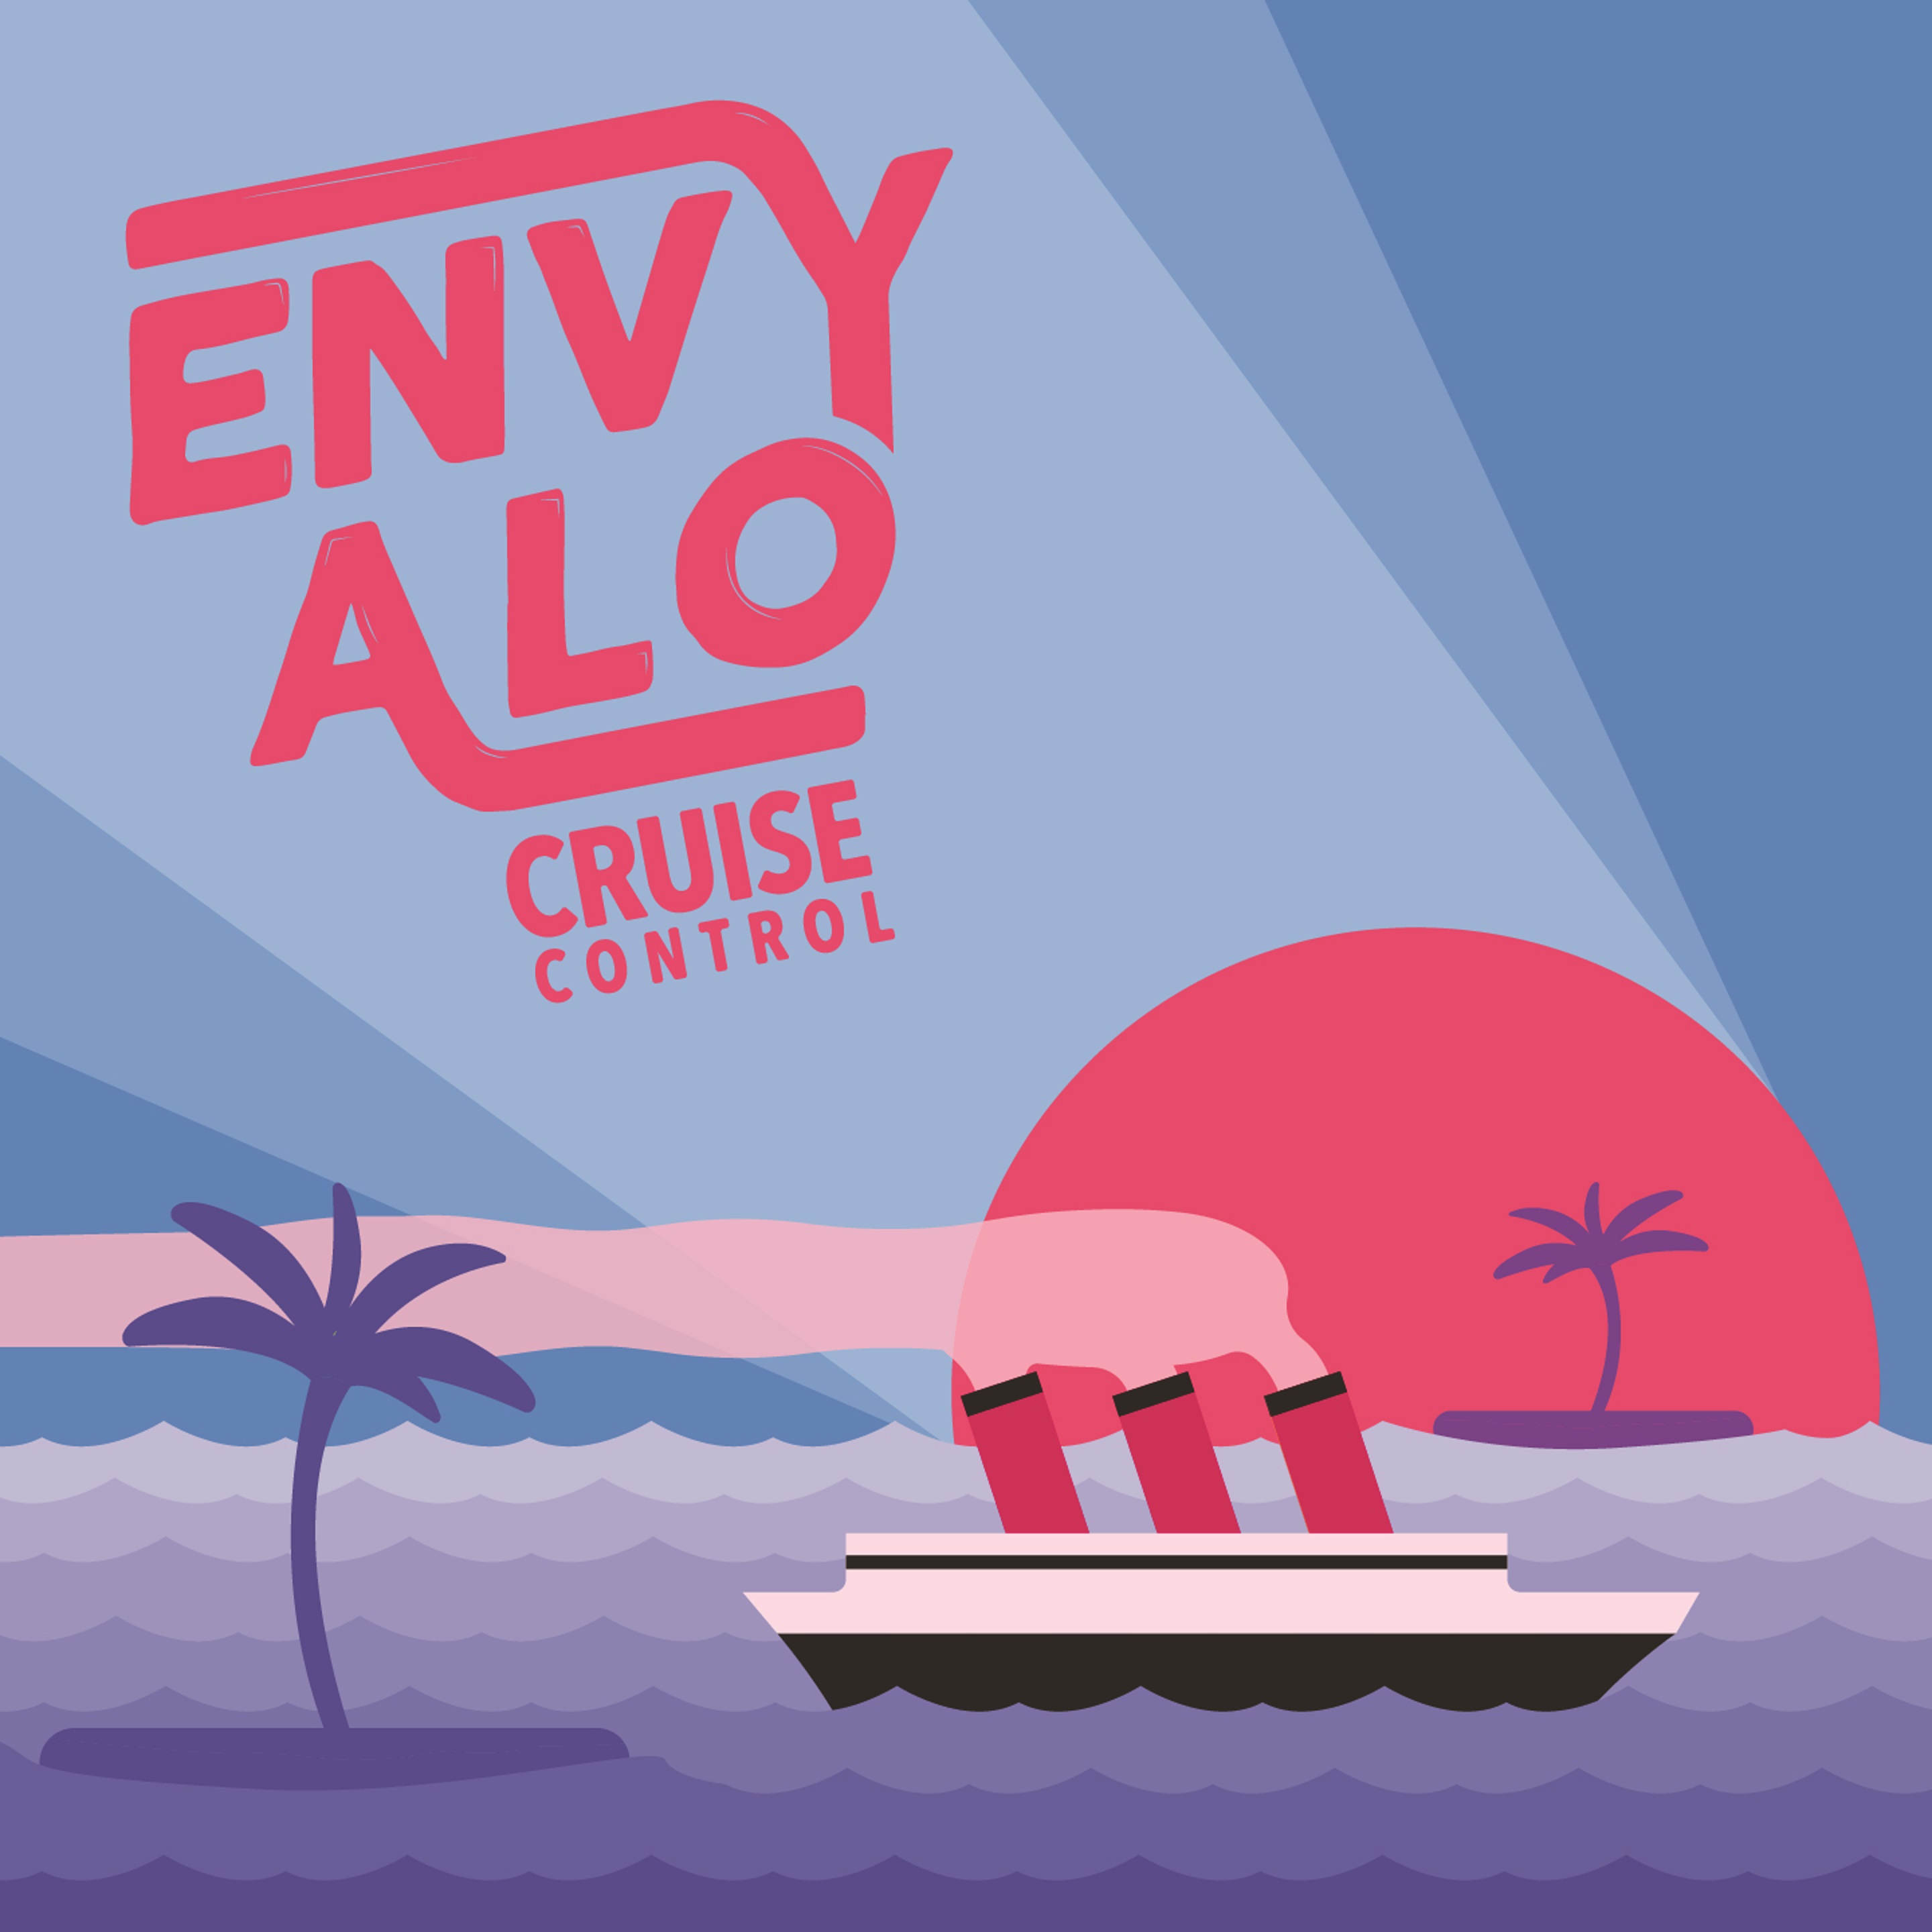 Envy Alo to Release New Album “Cruise Control” on September 14